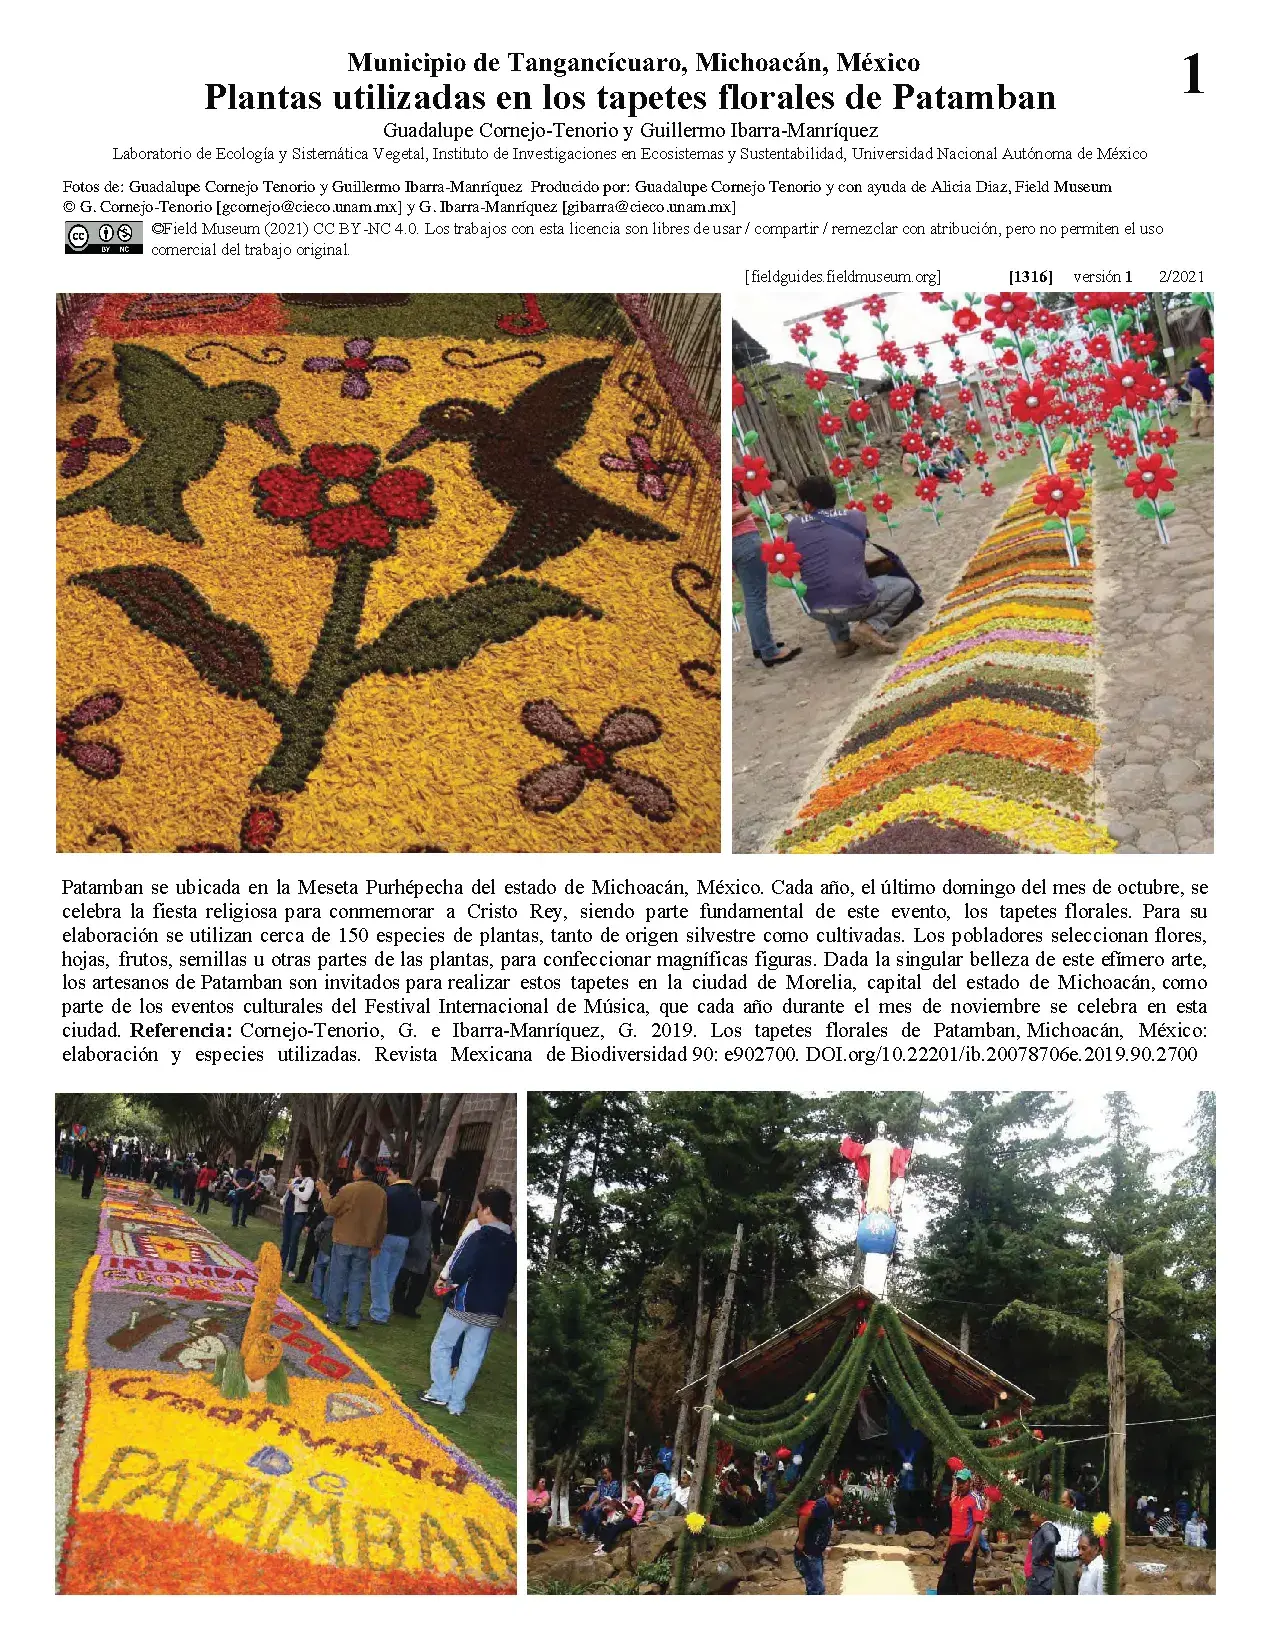  1316_mexico_plants_used_in_patamban_floral_rugs_.pdf